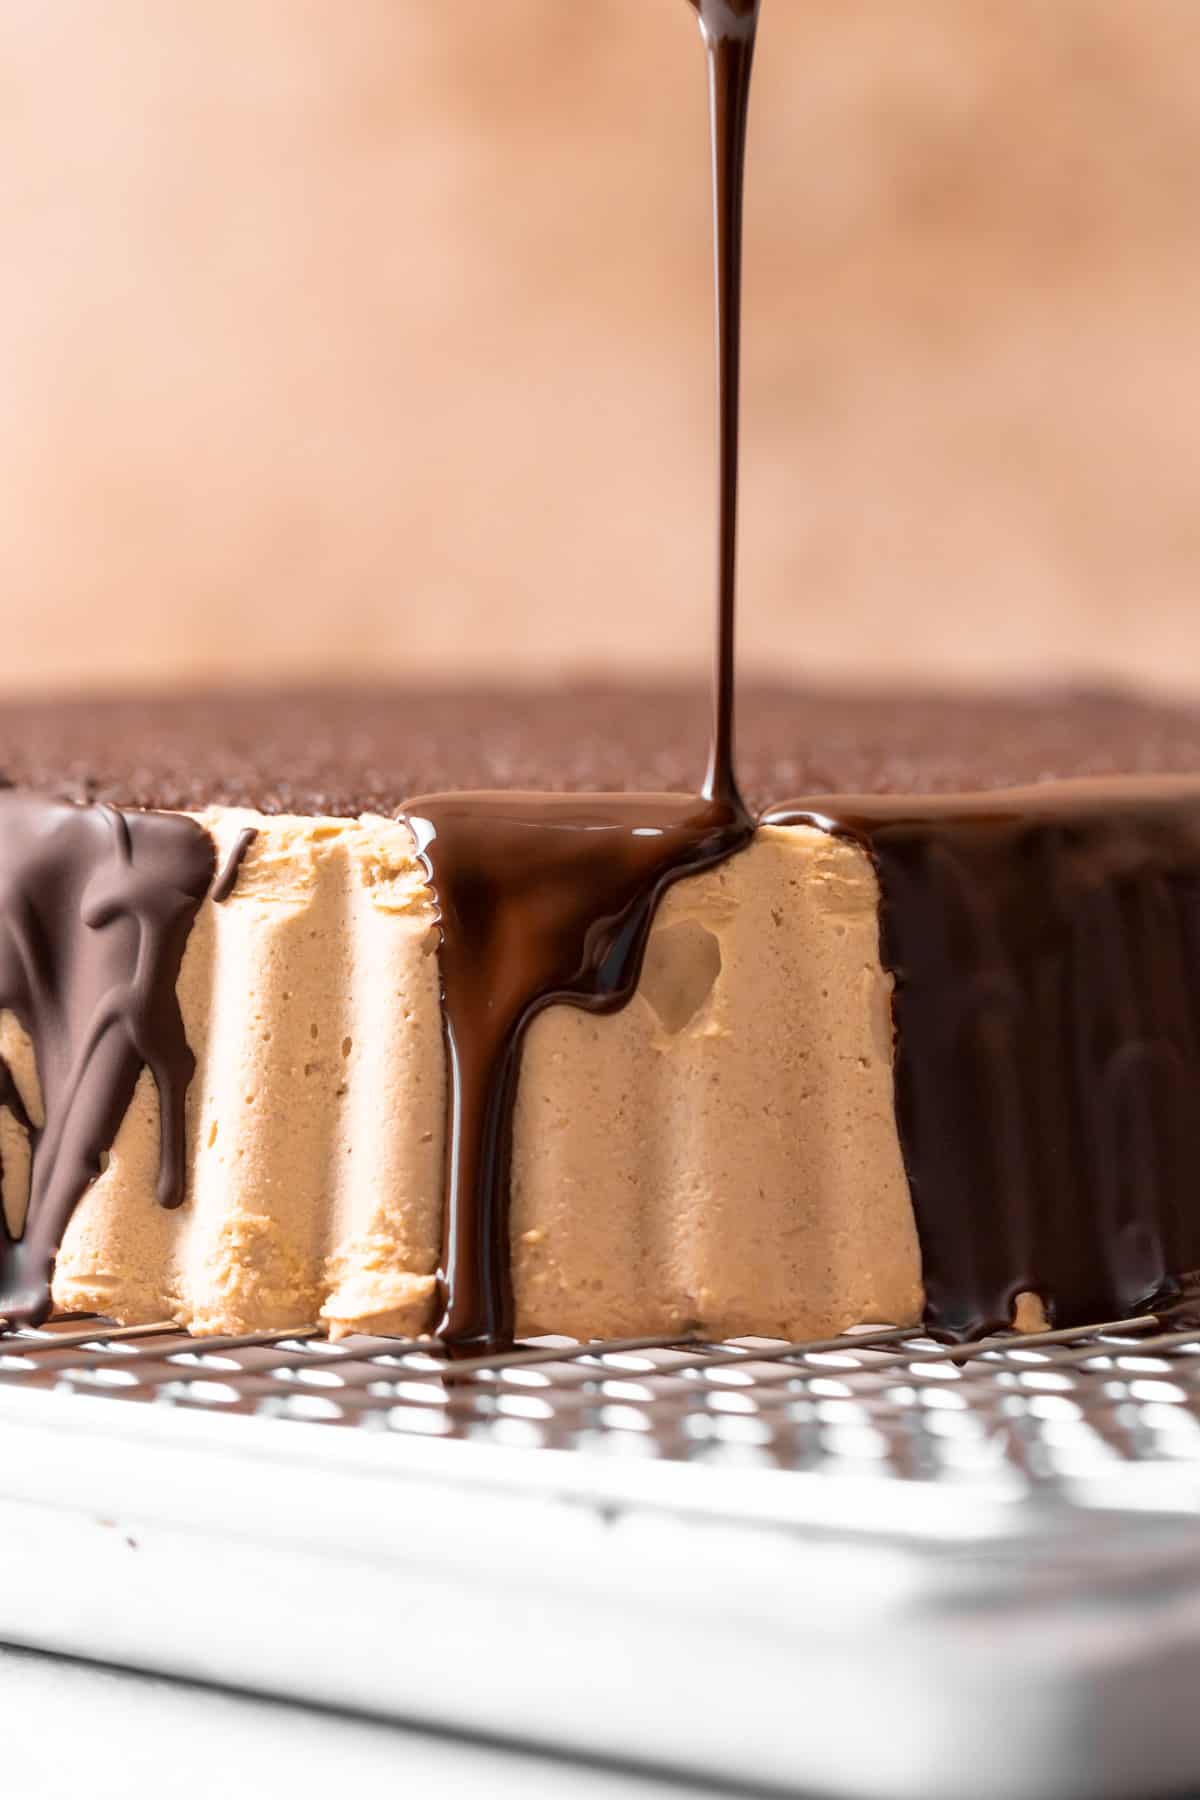 A stream of chocolate ganache being poured over the edge of the cake to drip down the sides.